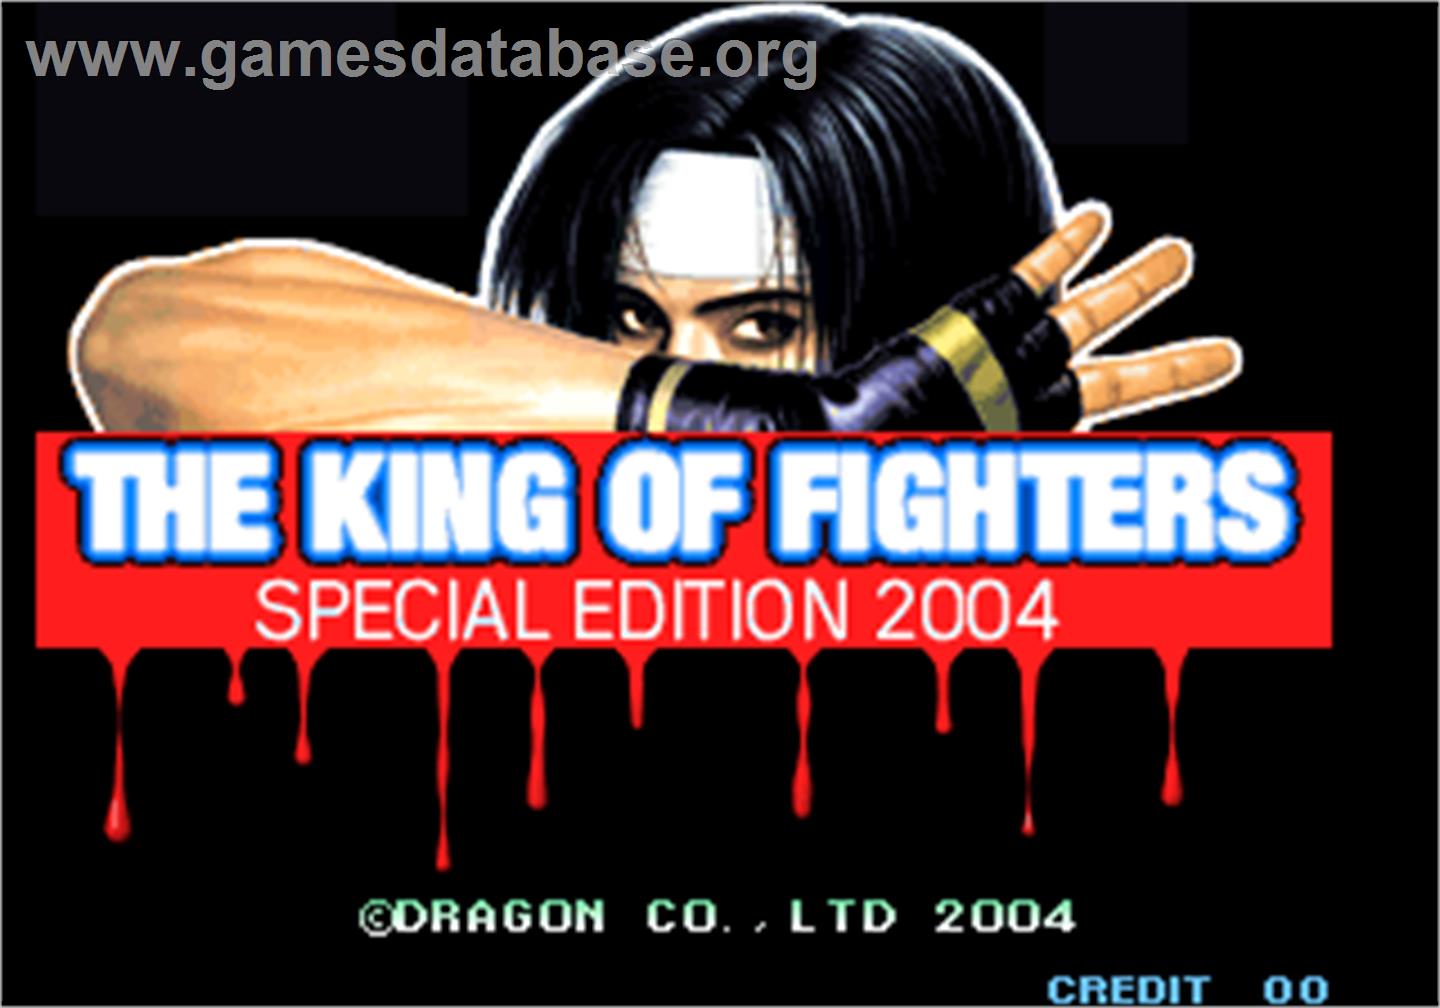 The King of Fighters Special Edition 2004 - Arcade - Artwork - Title Screen